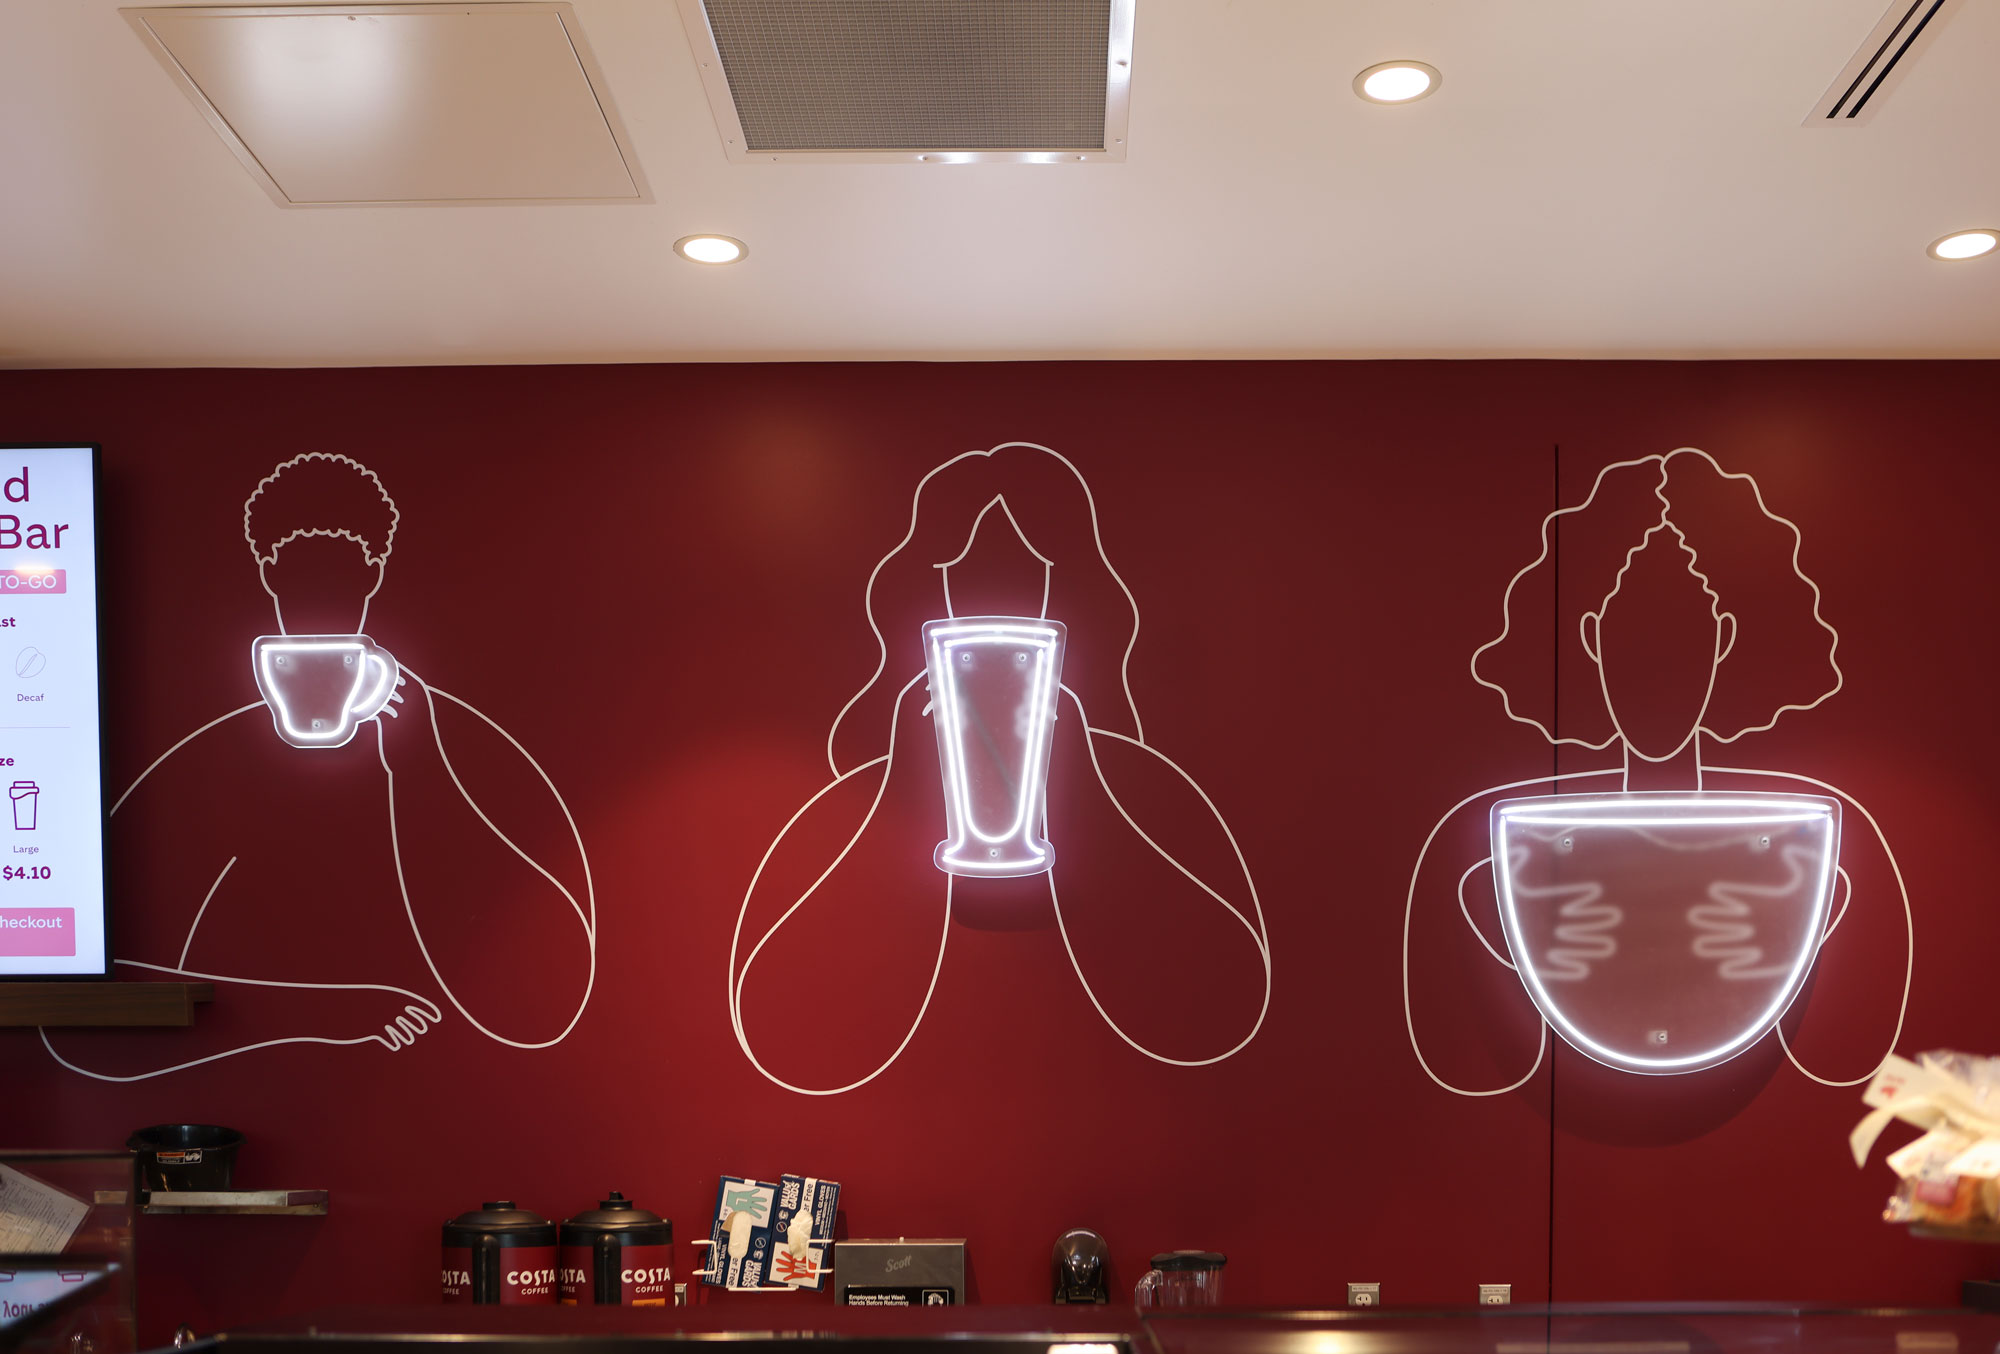 Costa Coffee design wall with 3 people drinking coffee